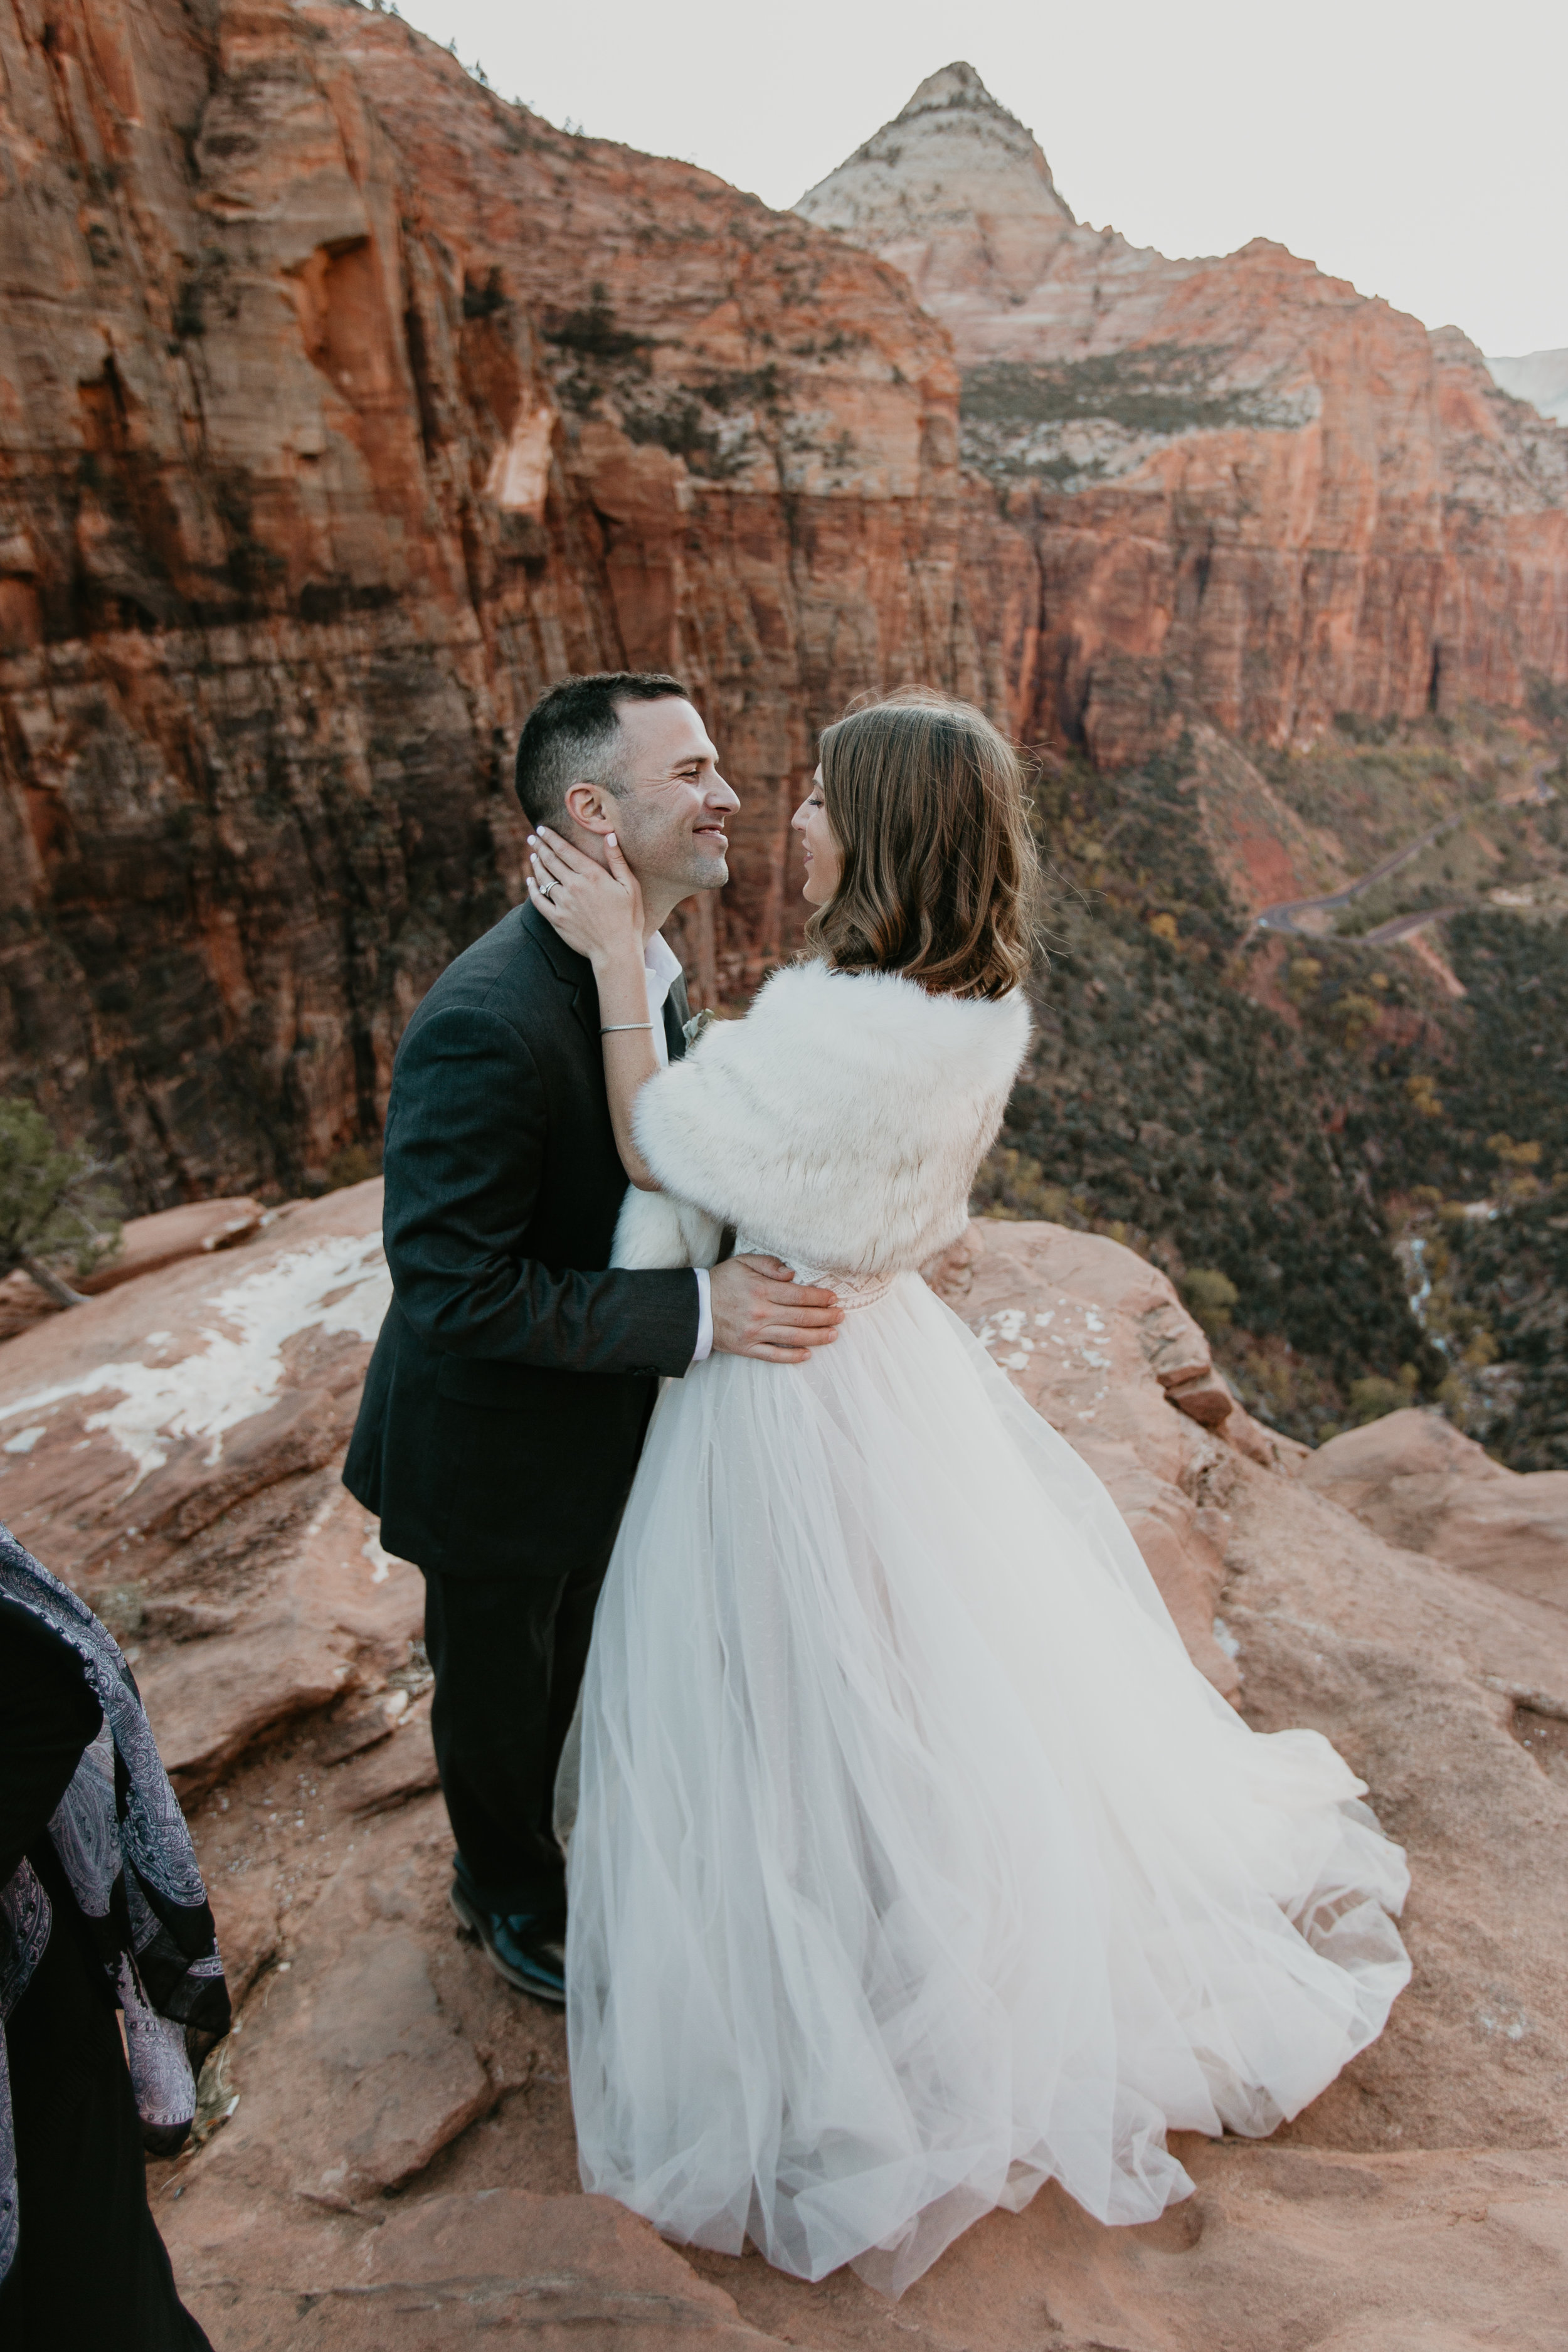 nicole-daacke-photography-zion-national-park-elopement-photographer-canyon-overlook-trail-elope-hiking-adventure-wedding-photos-fall-utah-red-rock-canyon-stgeorge-eloping-photographer-58.jpg